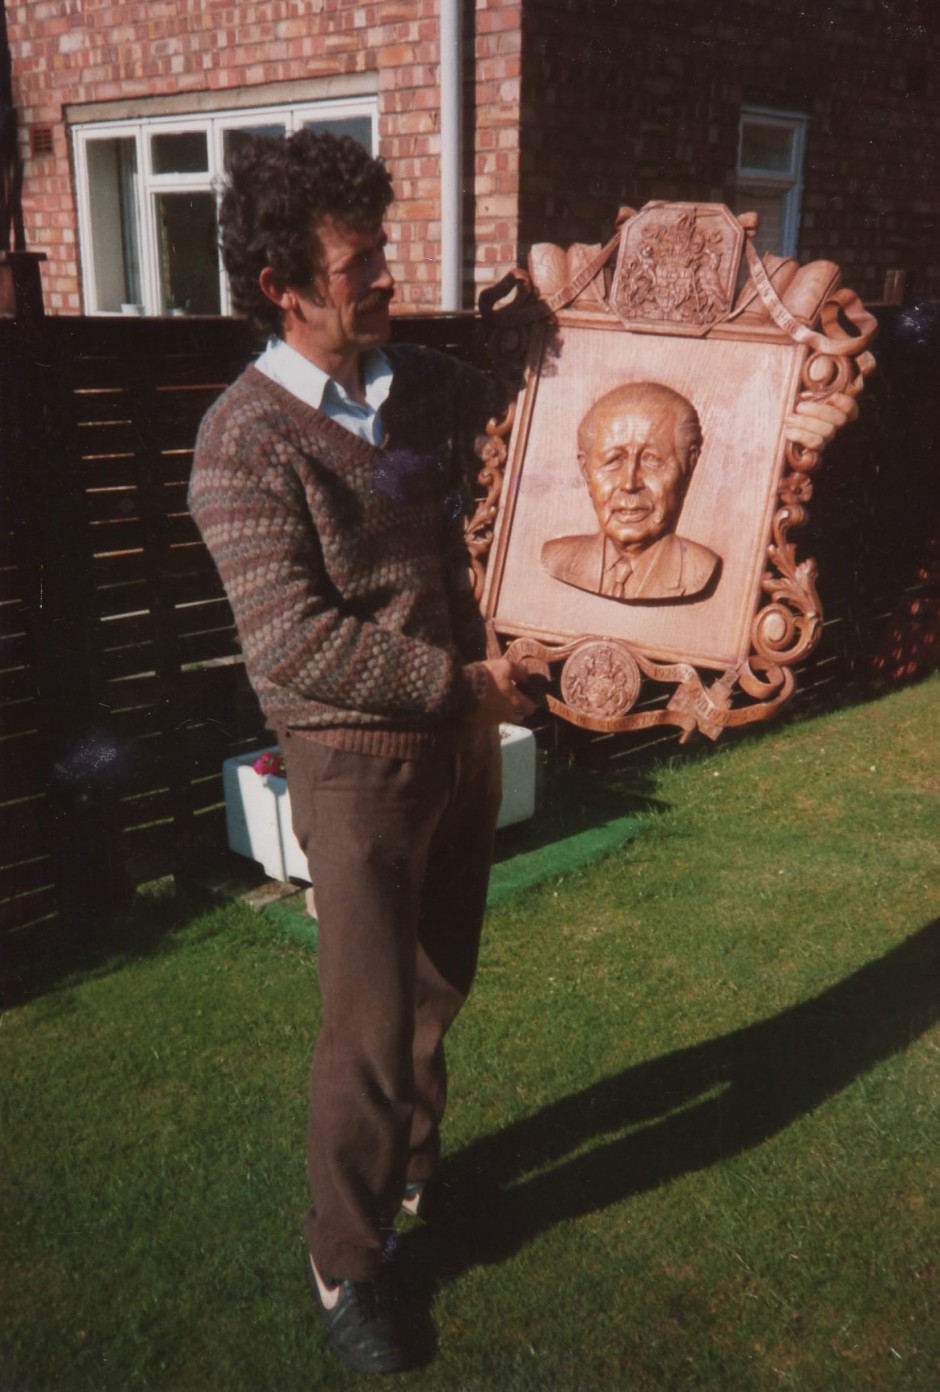 A younger Jose holds the completed carving. - harold macmillan carving wooden plaque